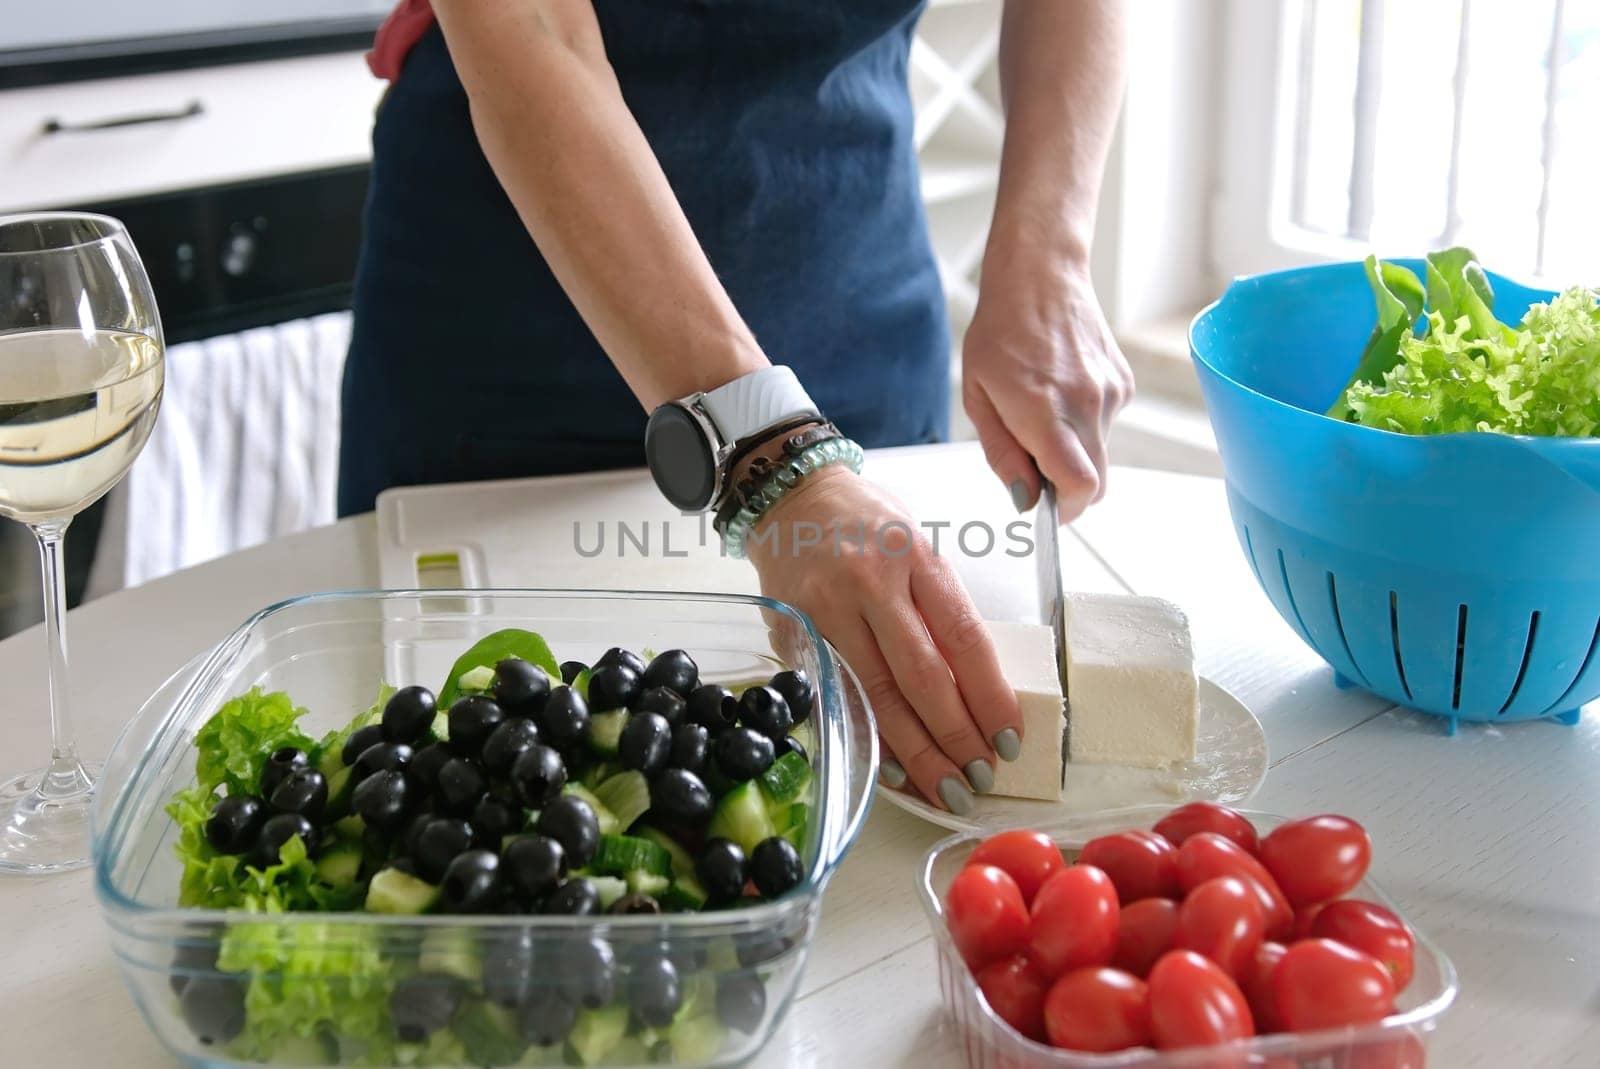 Girl Cuts Feta Cheese For Greek Salad, Preparing Food At Home In Kitchen